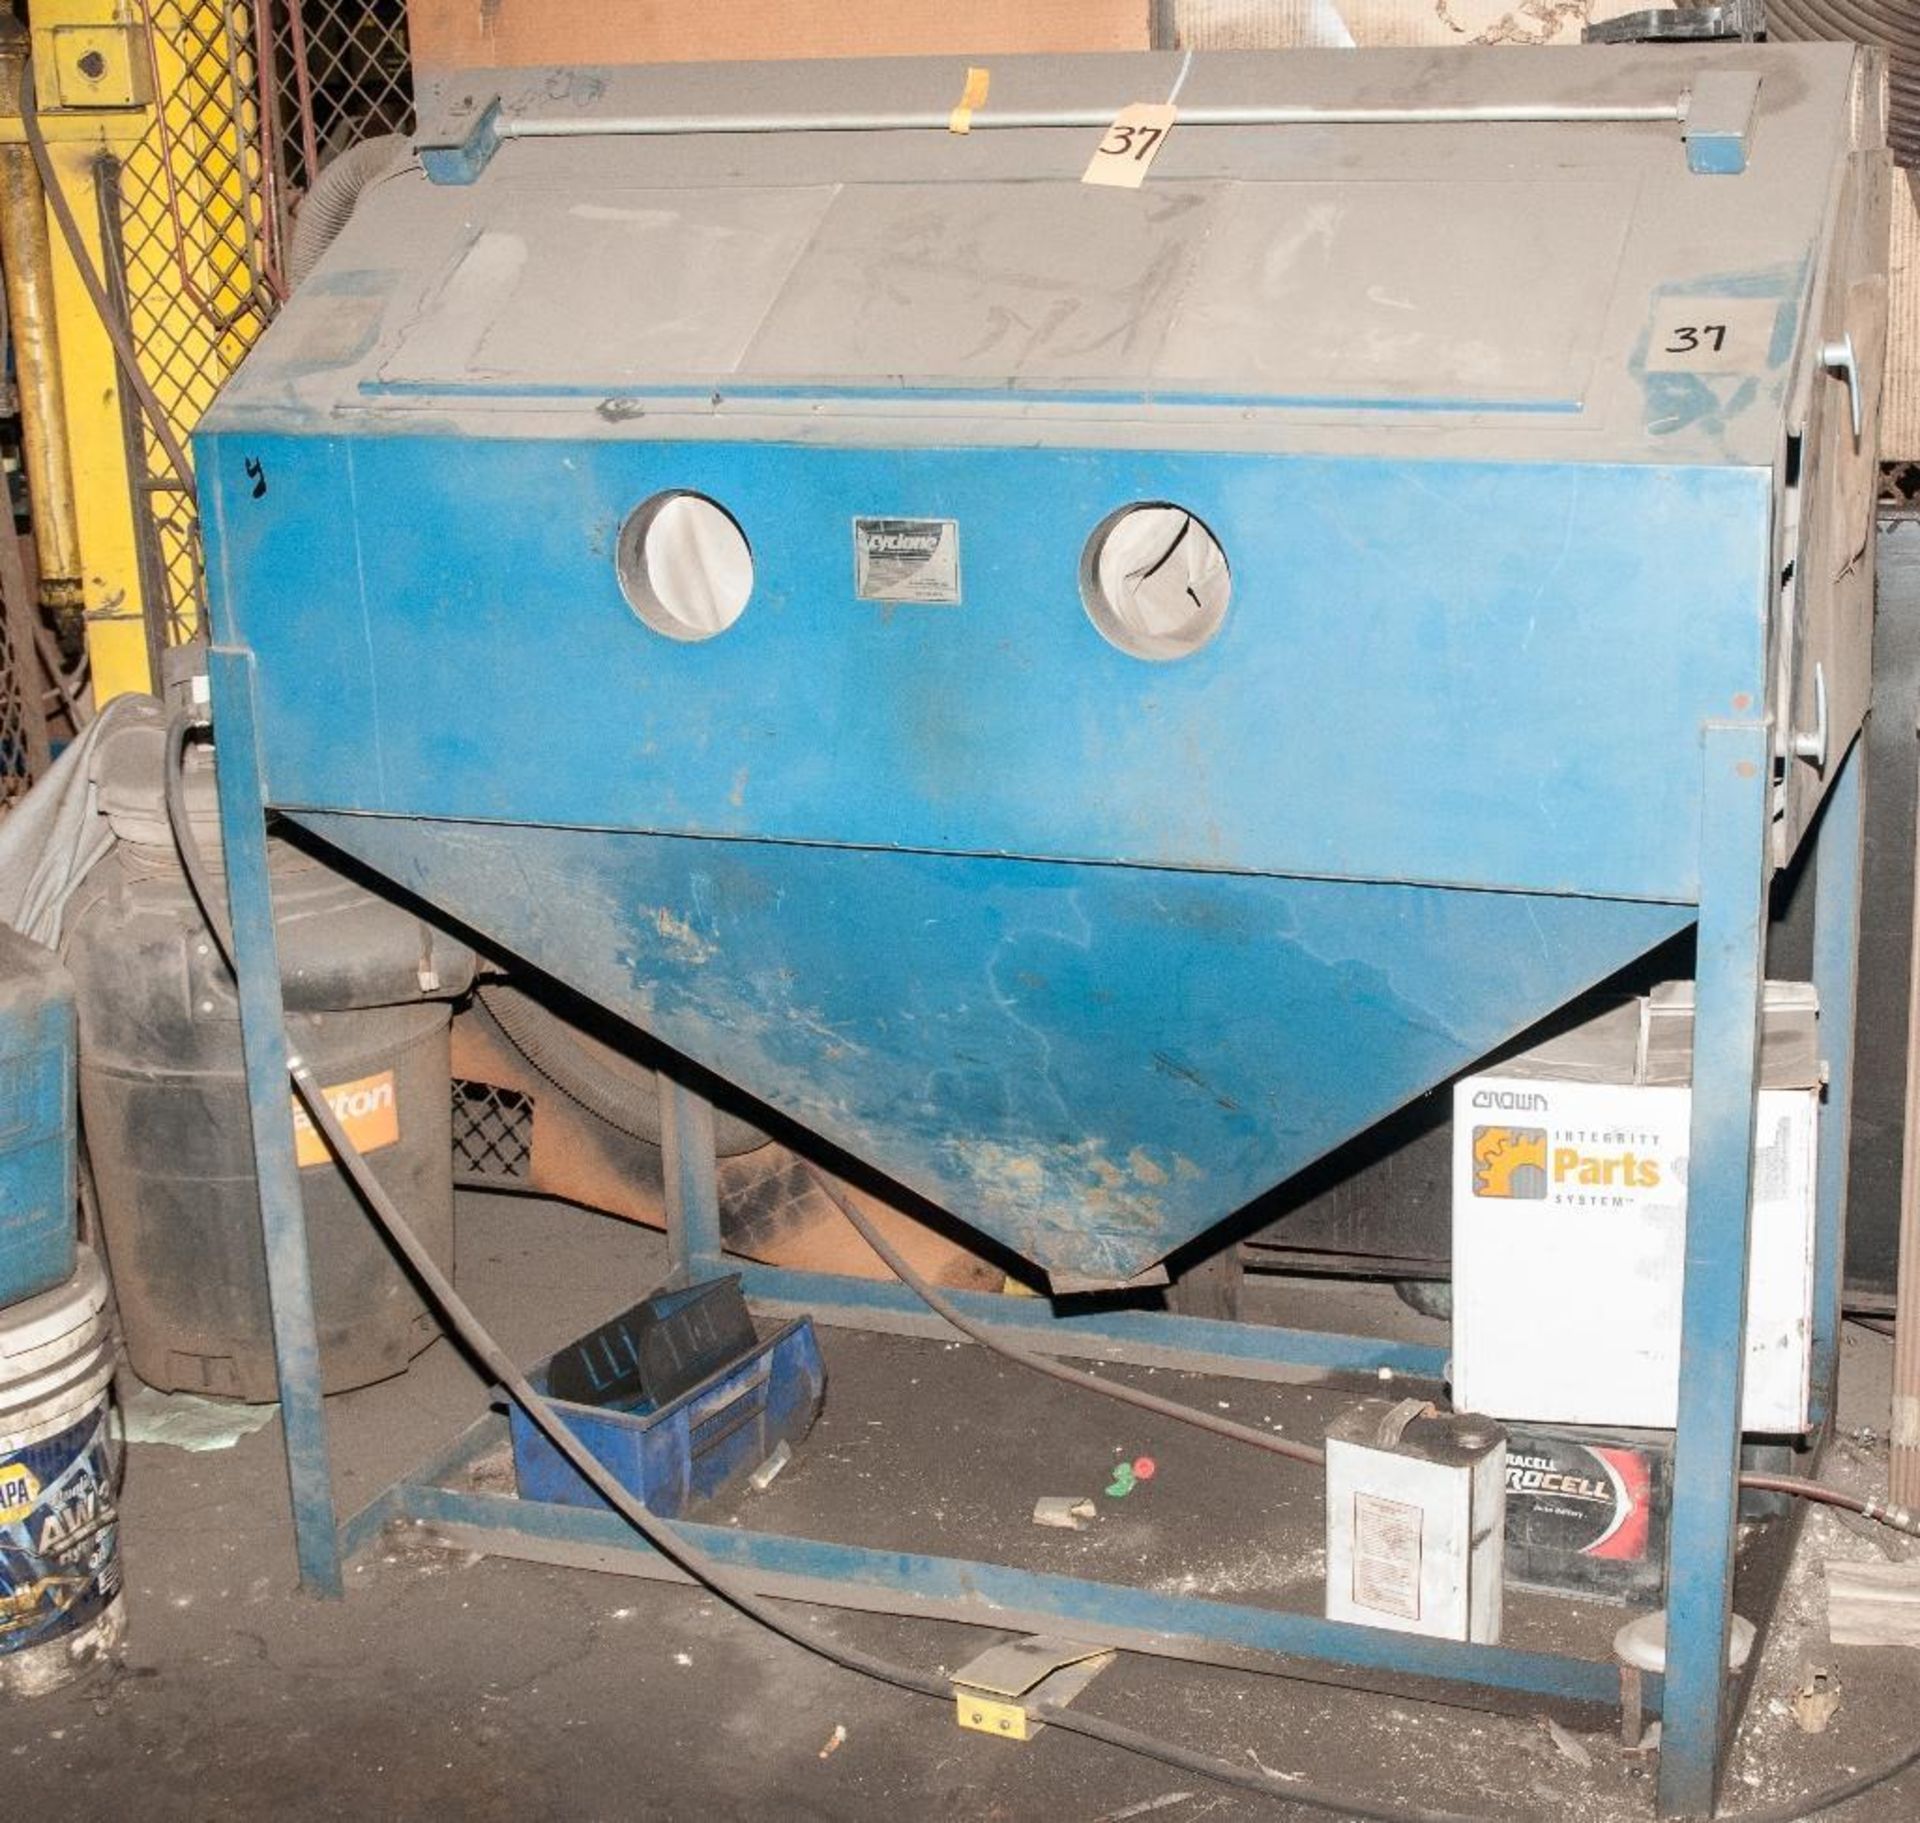 Cyclone Blasting Cabinet approx 5 Foot wide x 30 Inches Deep with Dayton Wet/Dry Vac, LOCATED-Super